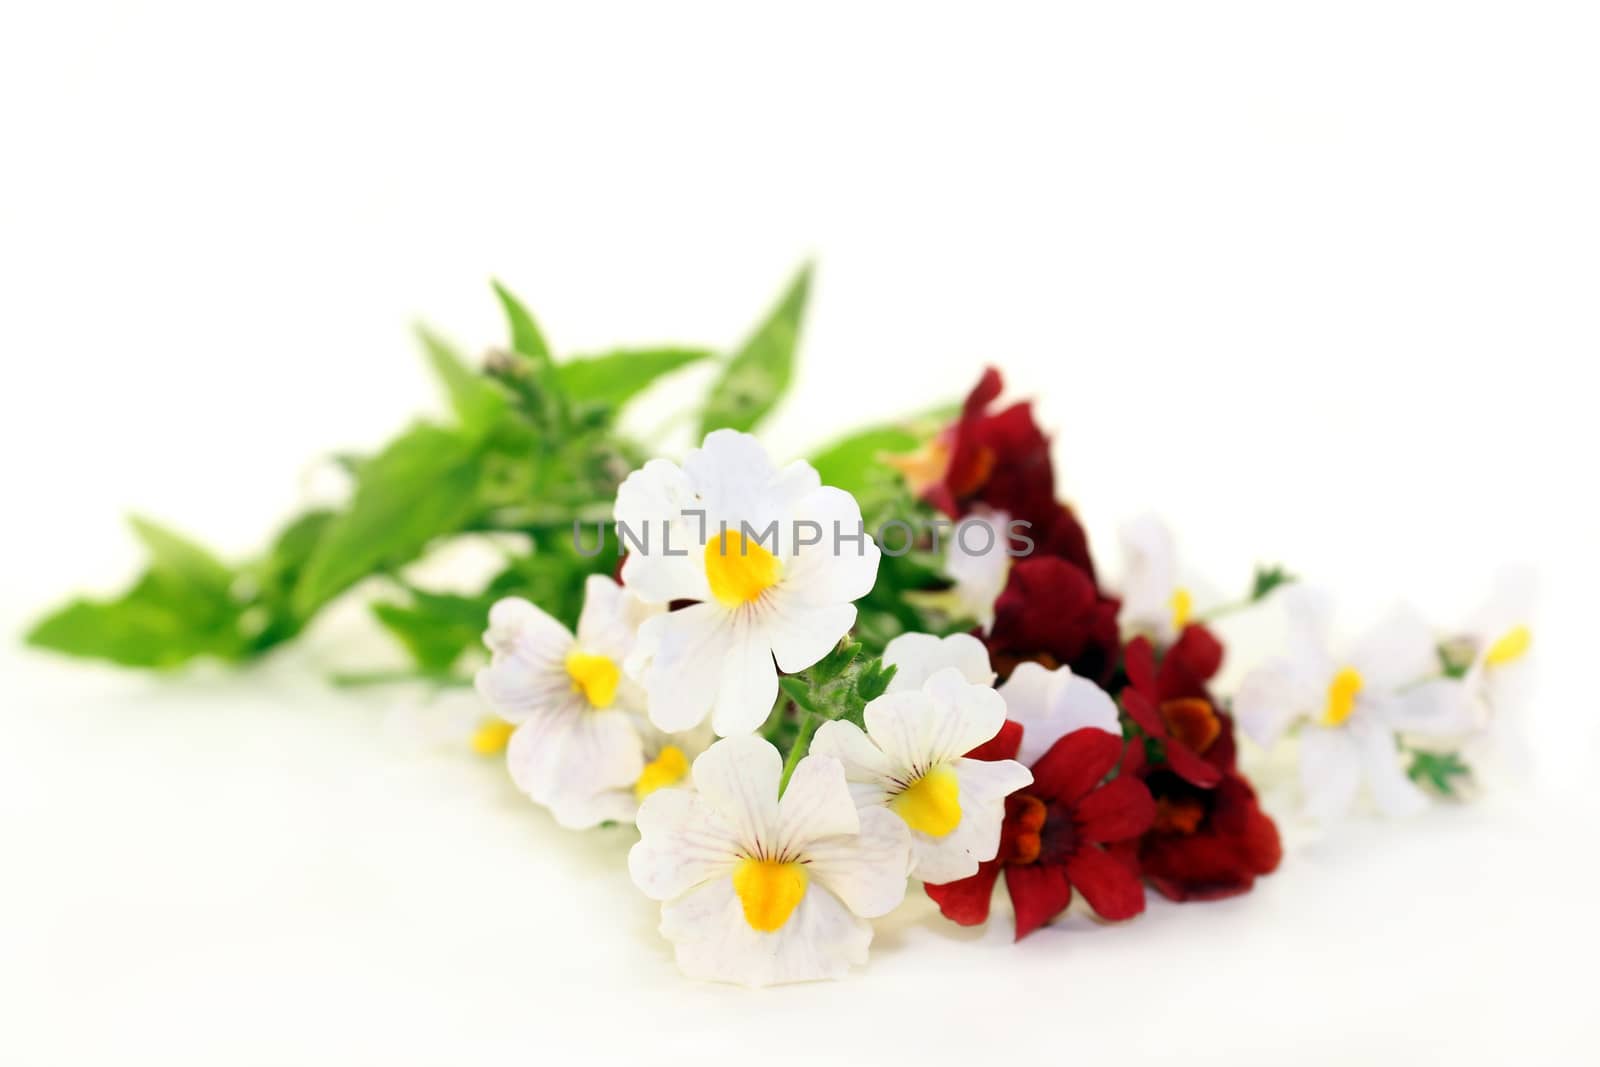 nemesia flower and leaves against a white background